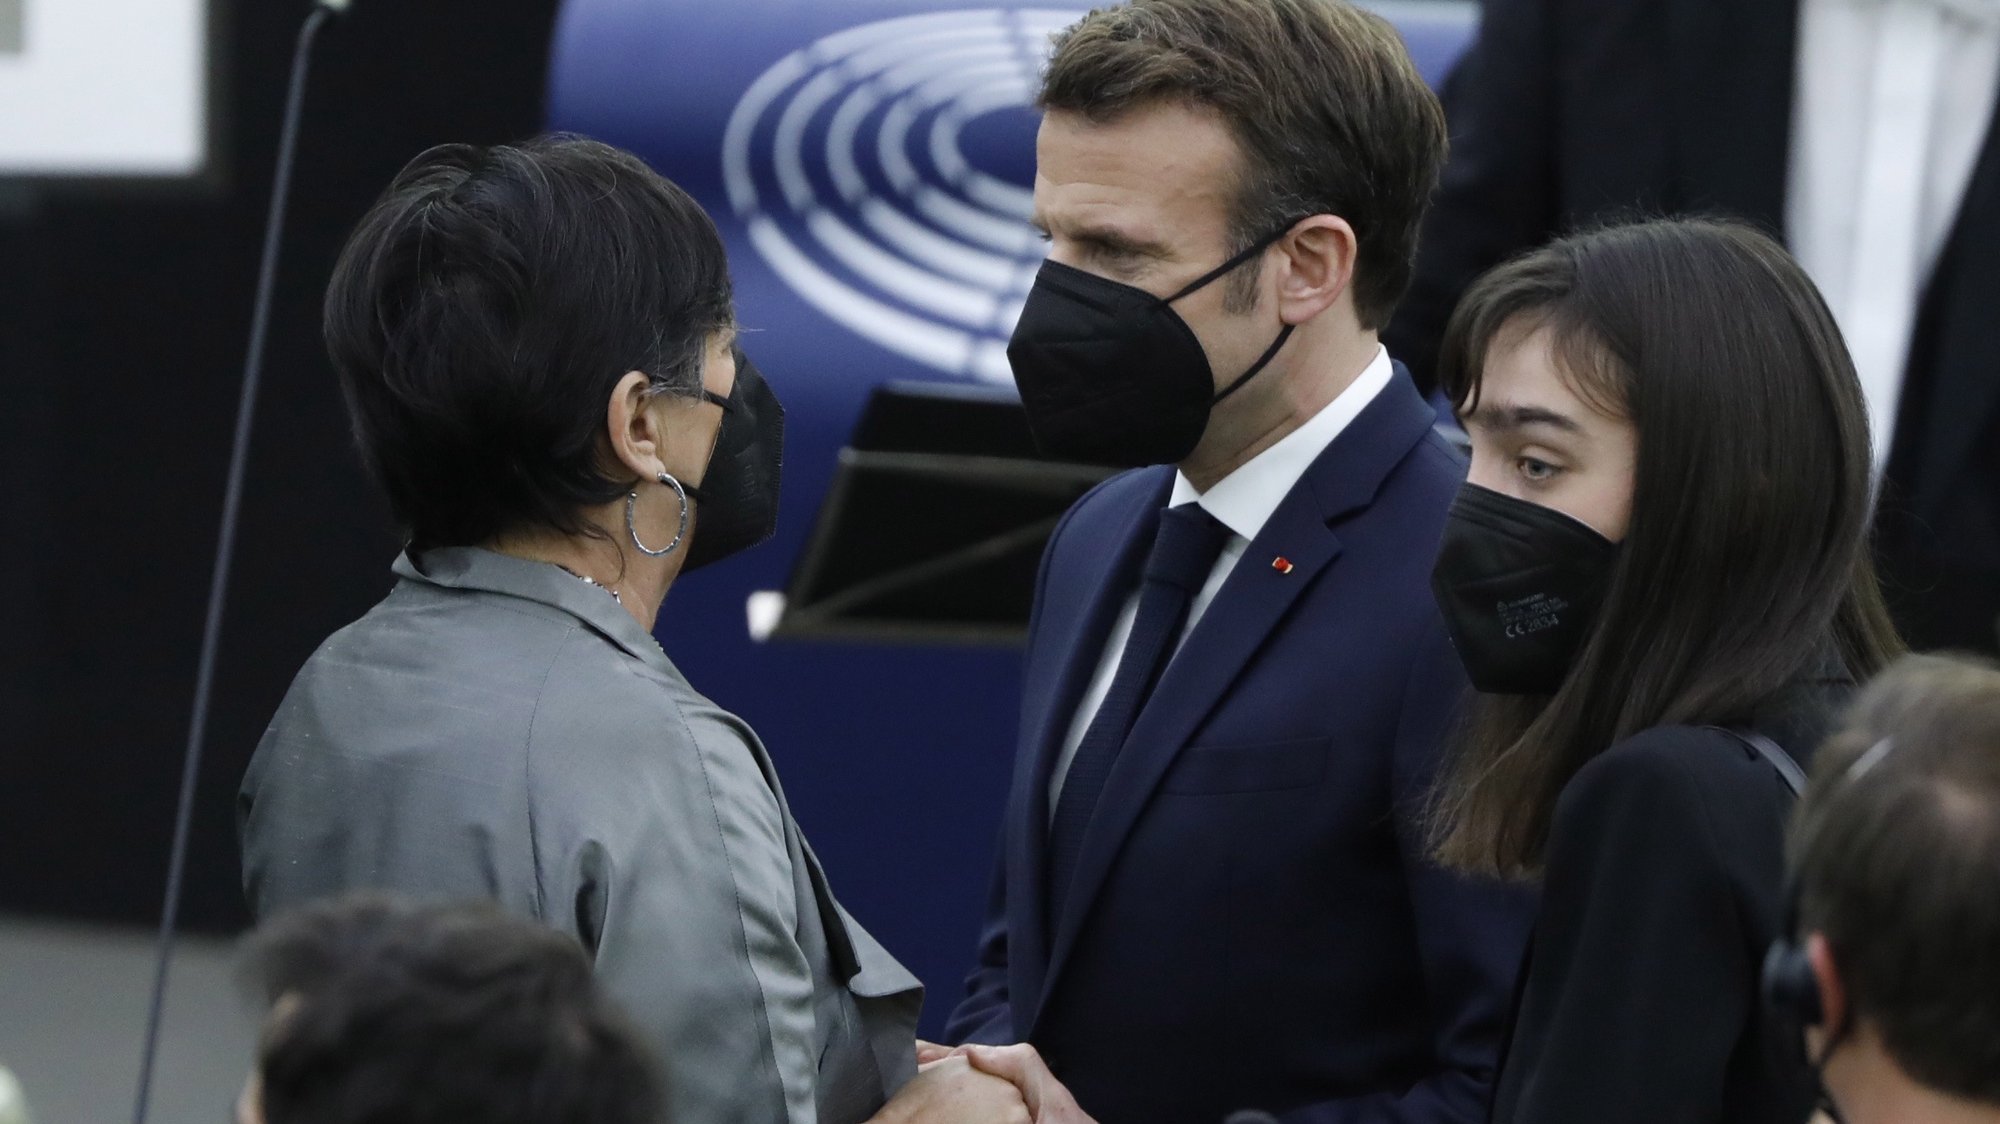 epa09691778 French president Emmanuel Macron (R) greets Alessandra Vittorini, widow of late Parliament&#039;s President David Sassoli during a ceremony to honour the memory of Parliament’s President David Sassoli, who passed away on 11 January, at the European Parliament in Strasbourg, France, 17 January 2022.  EPA/JULIEN WARNAND